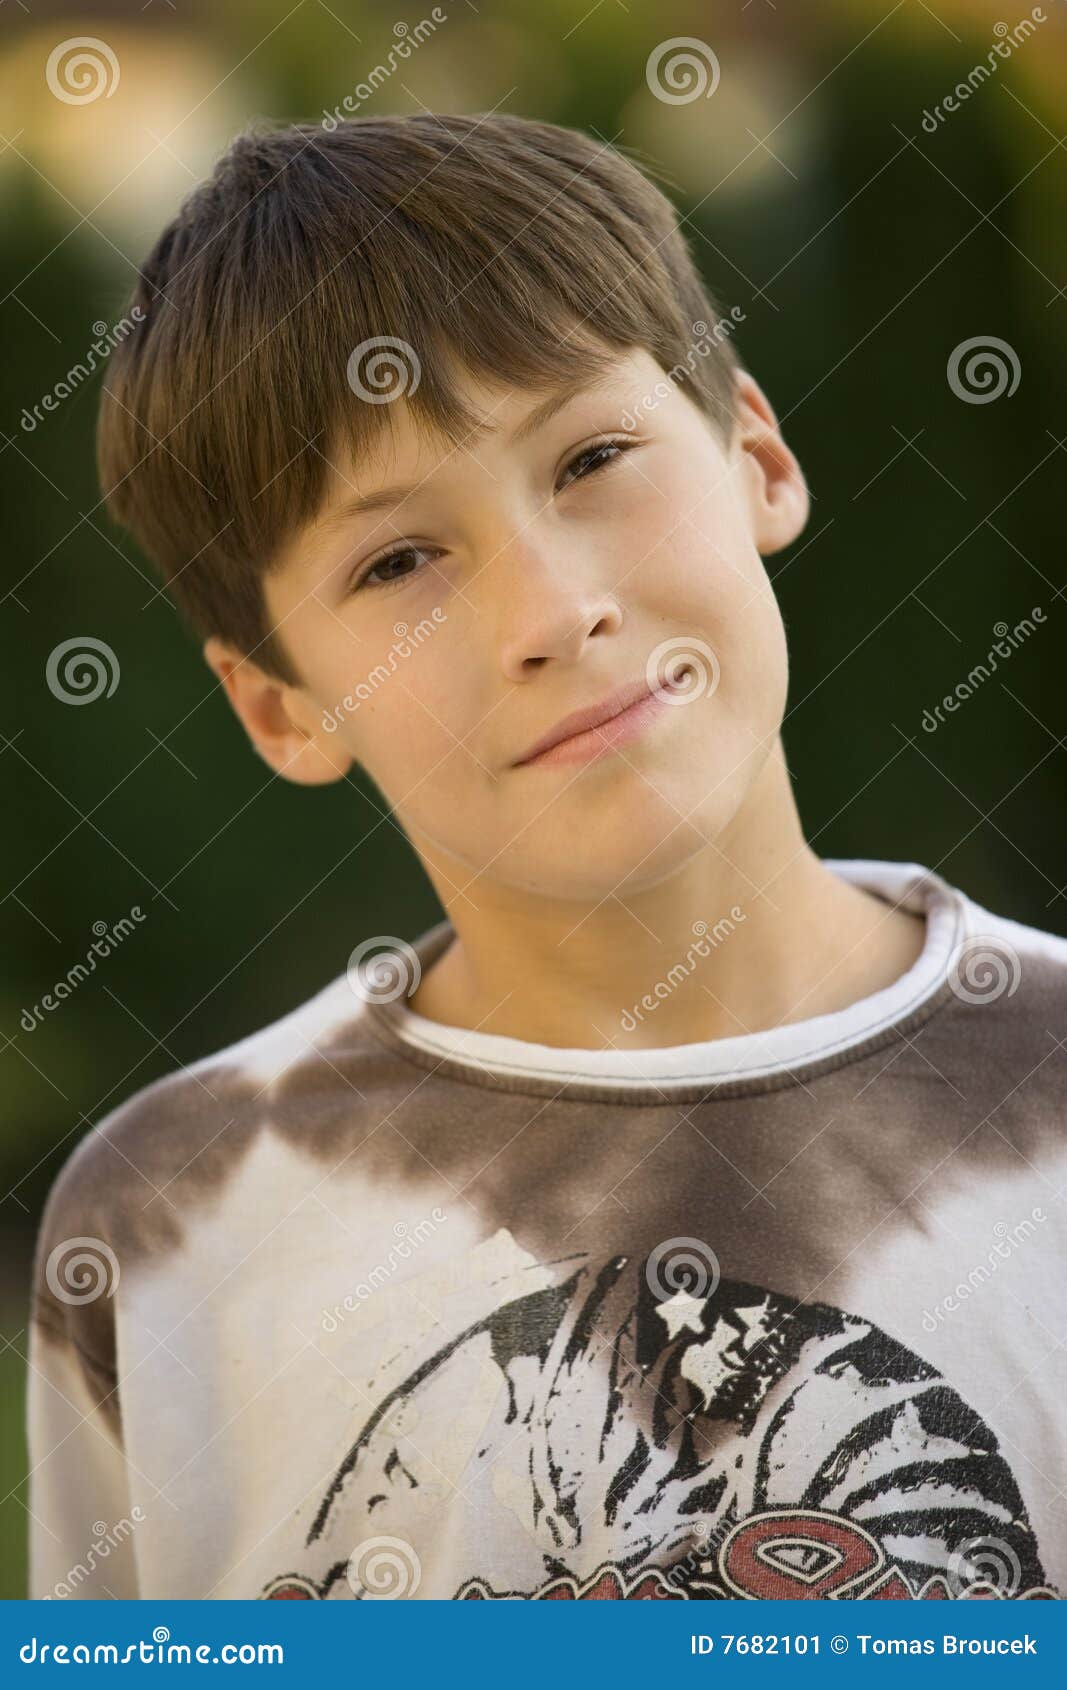 Portrait of a young boy stock image. Image of hair, model - 7682101